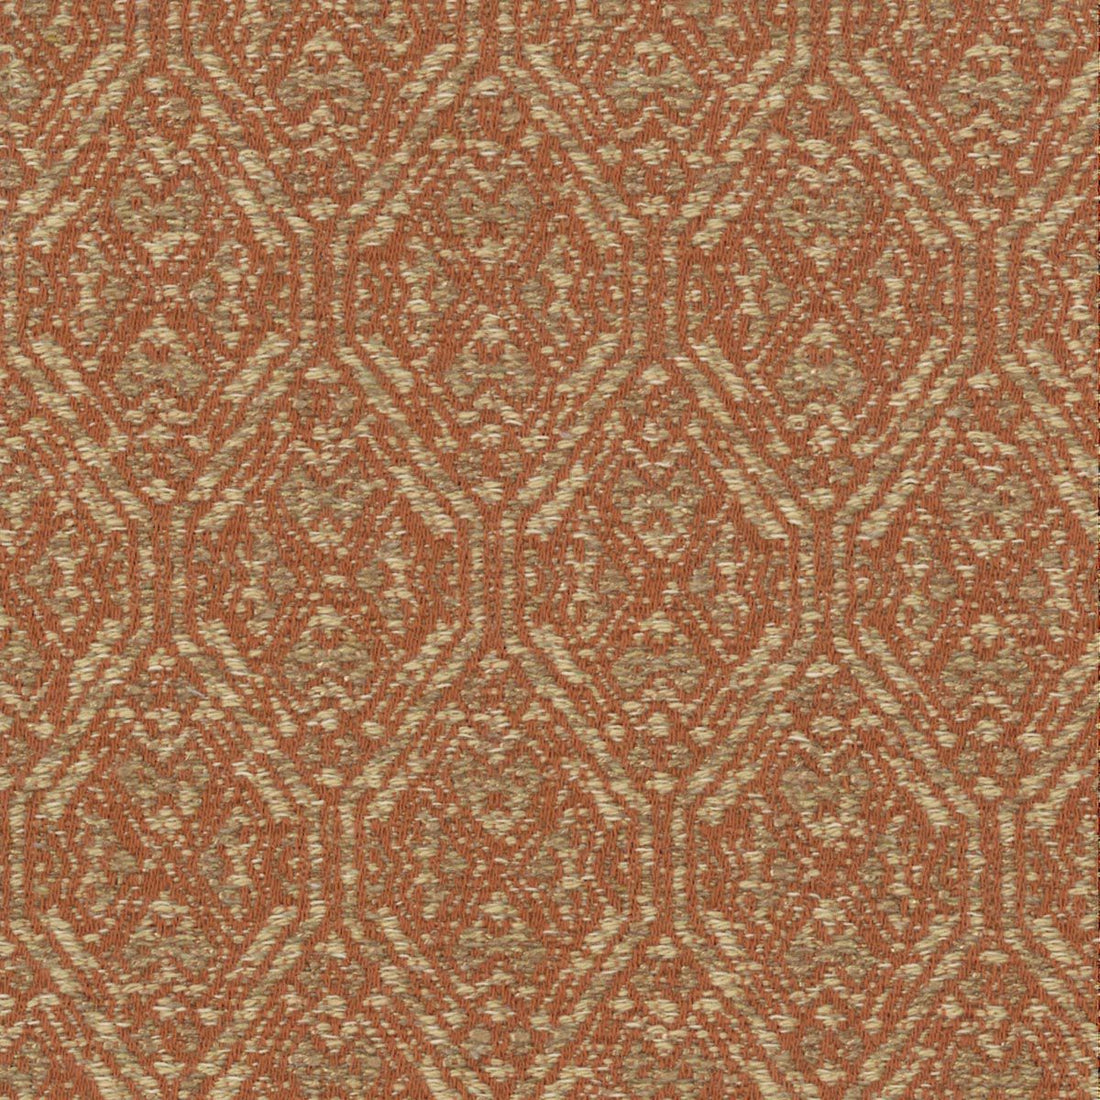 Vivaldi Gw fabric in copper color - pattern number WR 00071535 - by Scalamandre in the Old World Weavers collection